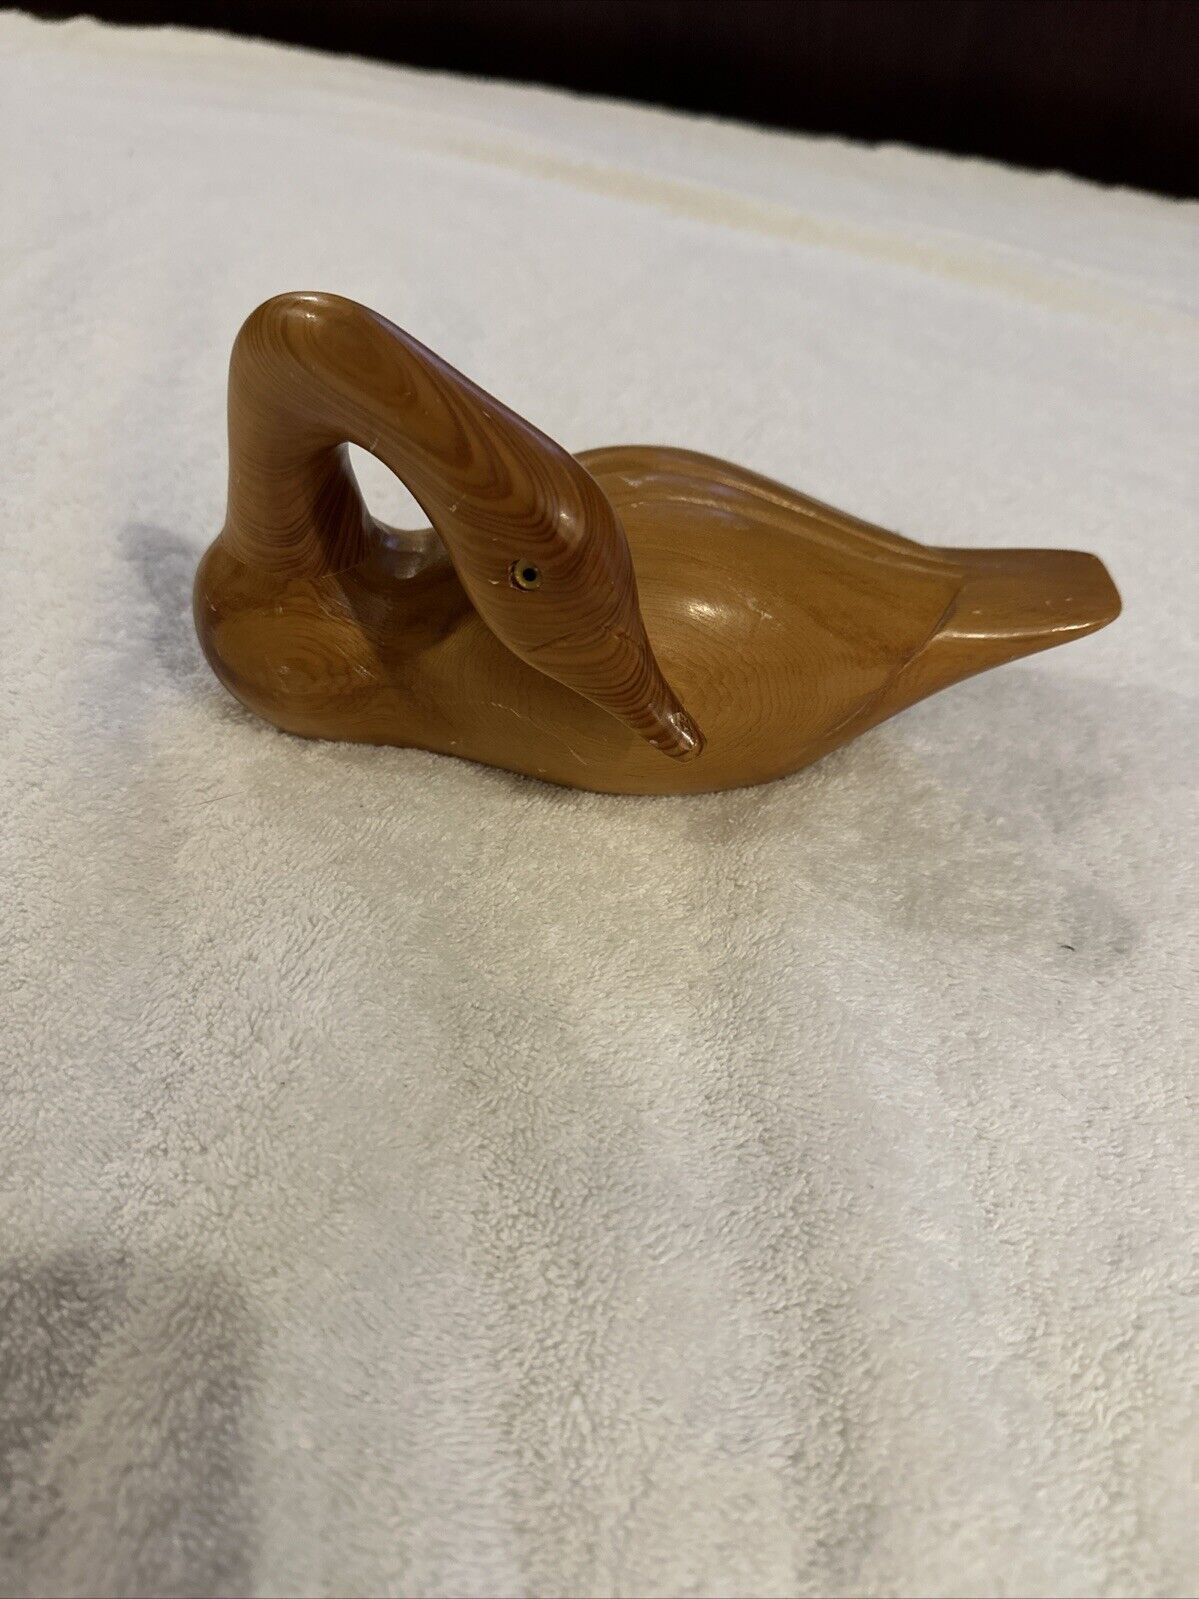 Vintage Americana Light Carved Wood Duck Wooden Figure W/ Glass Eyes 